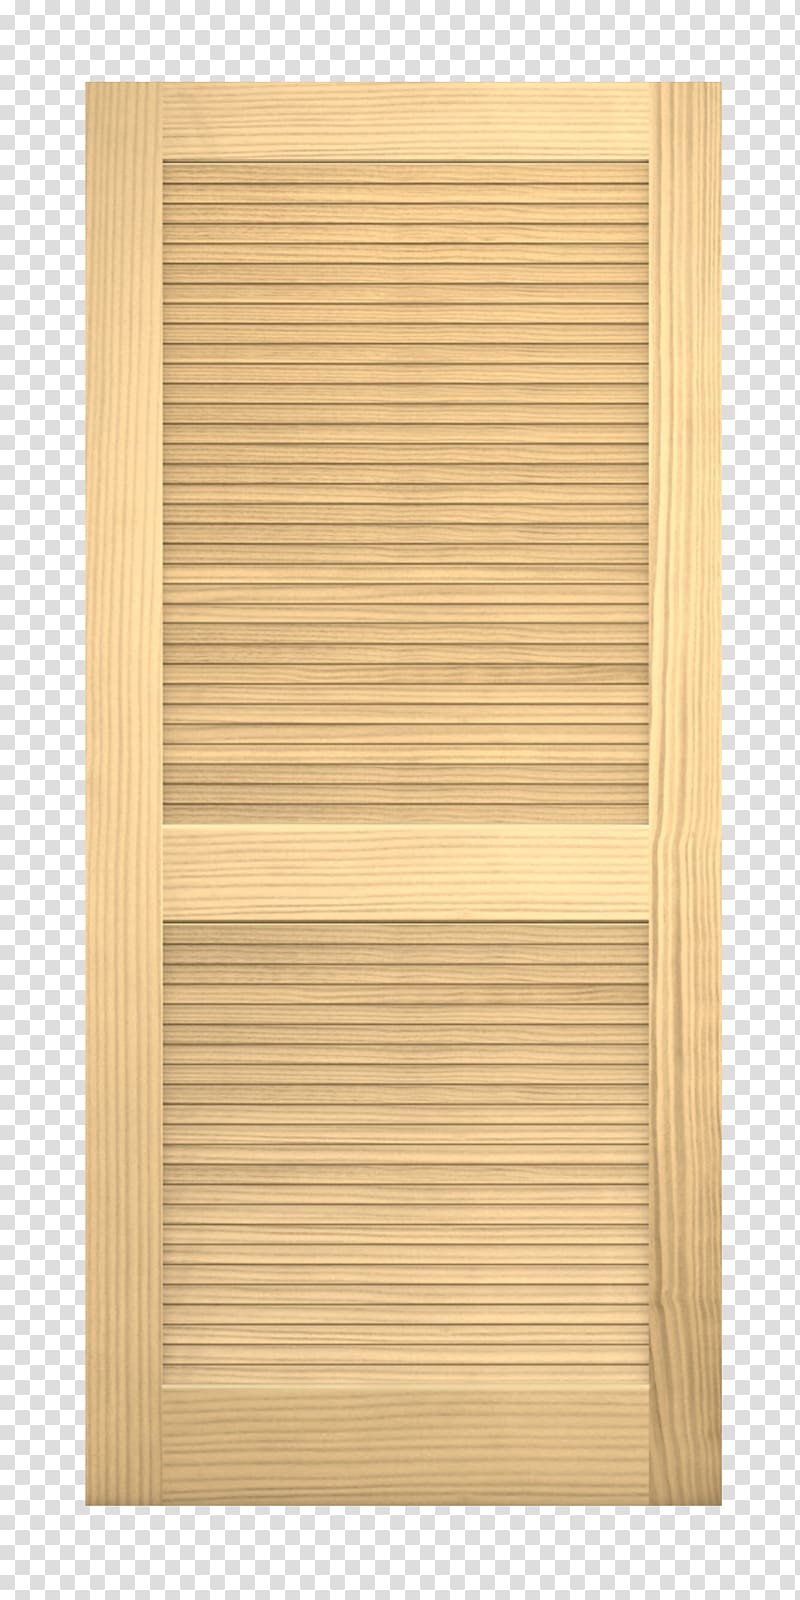 Plywood Wood stain Varnish Hardwood Angle, solid wood doors and windows transparent background PNG clipart